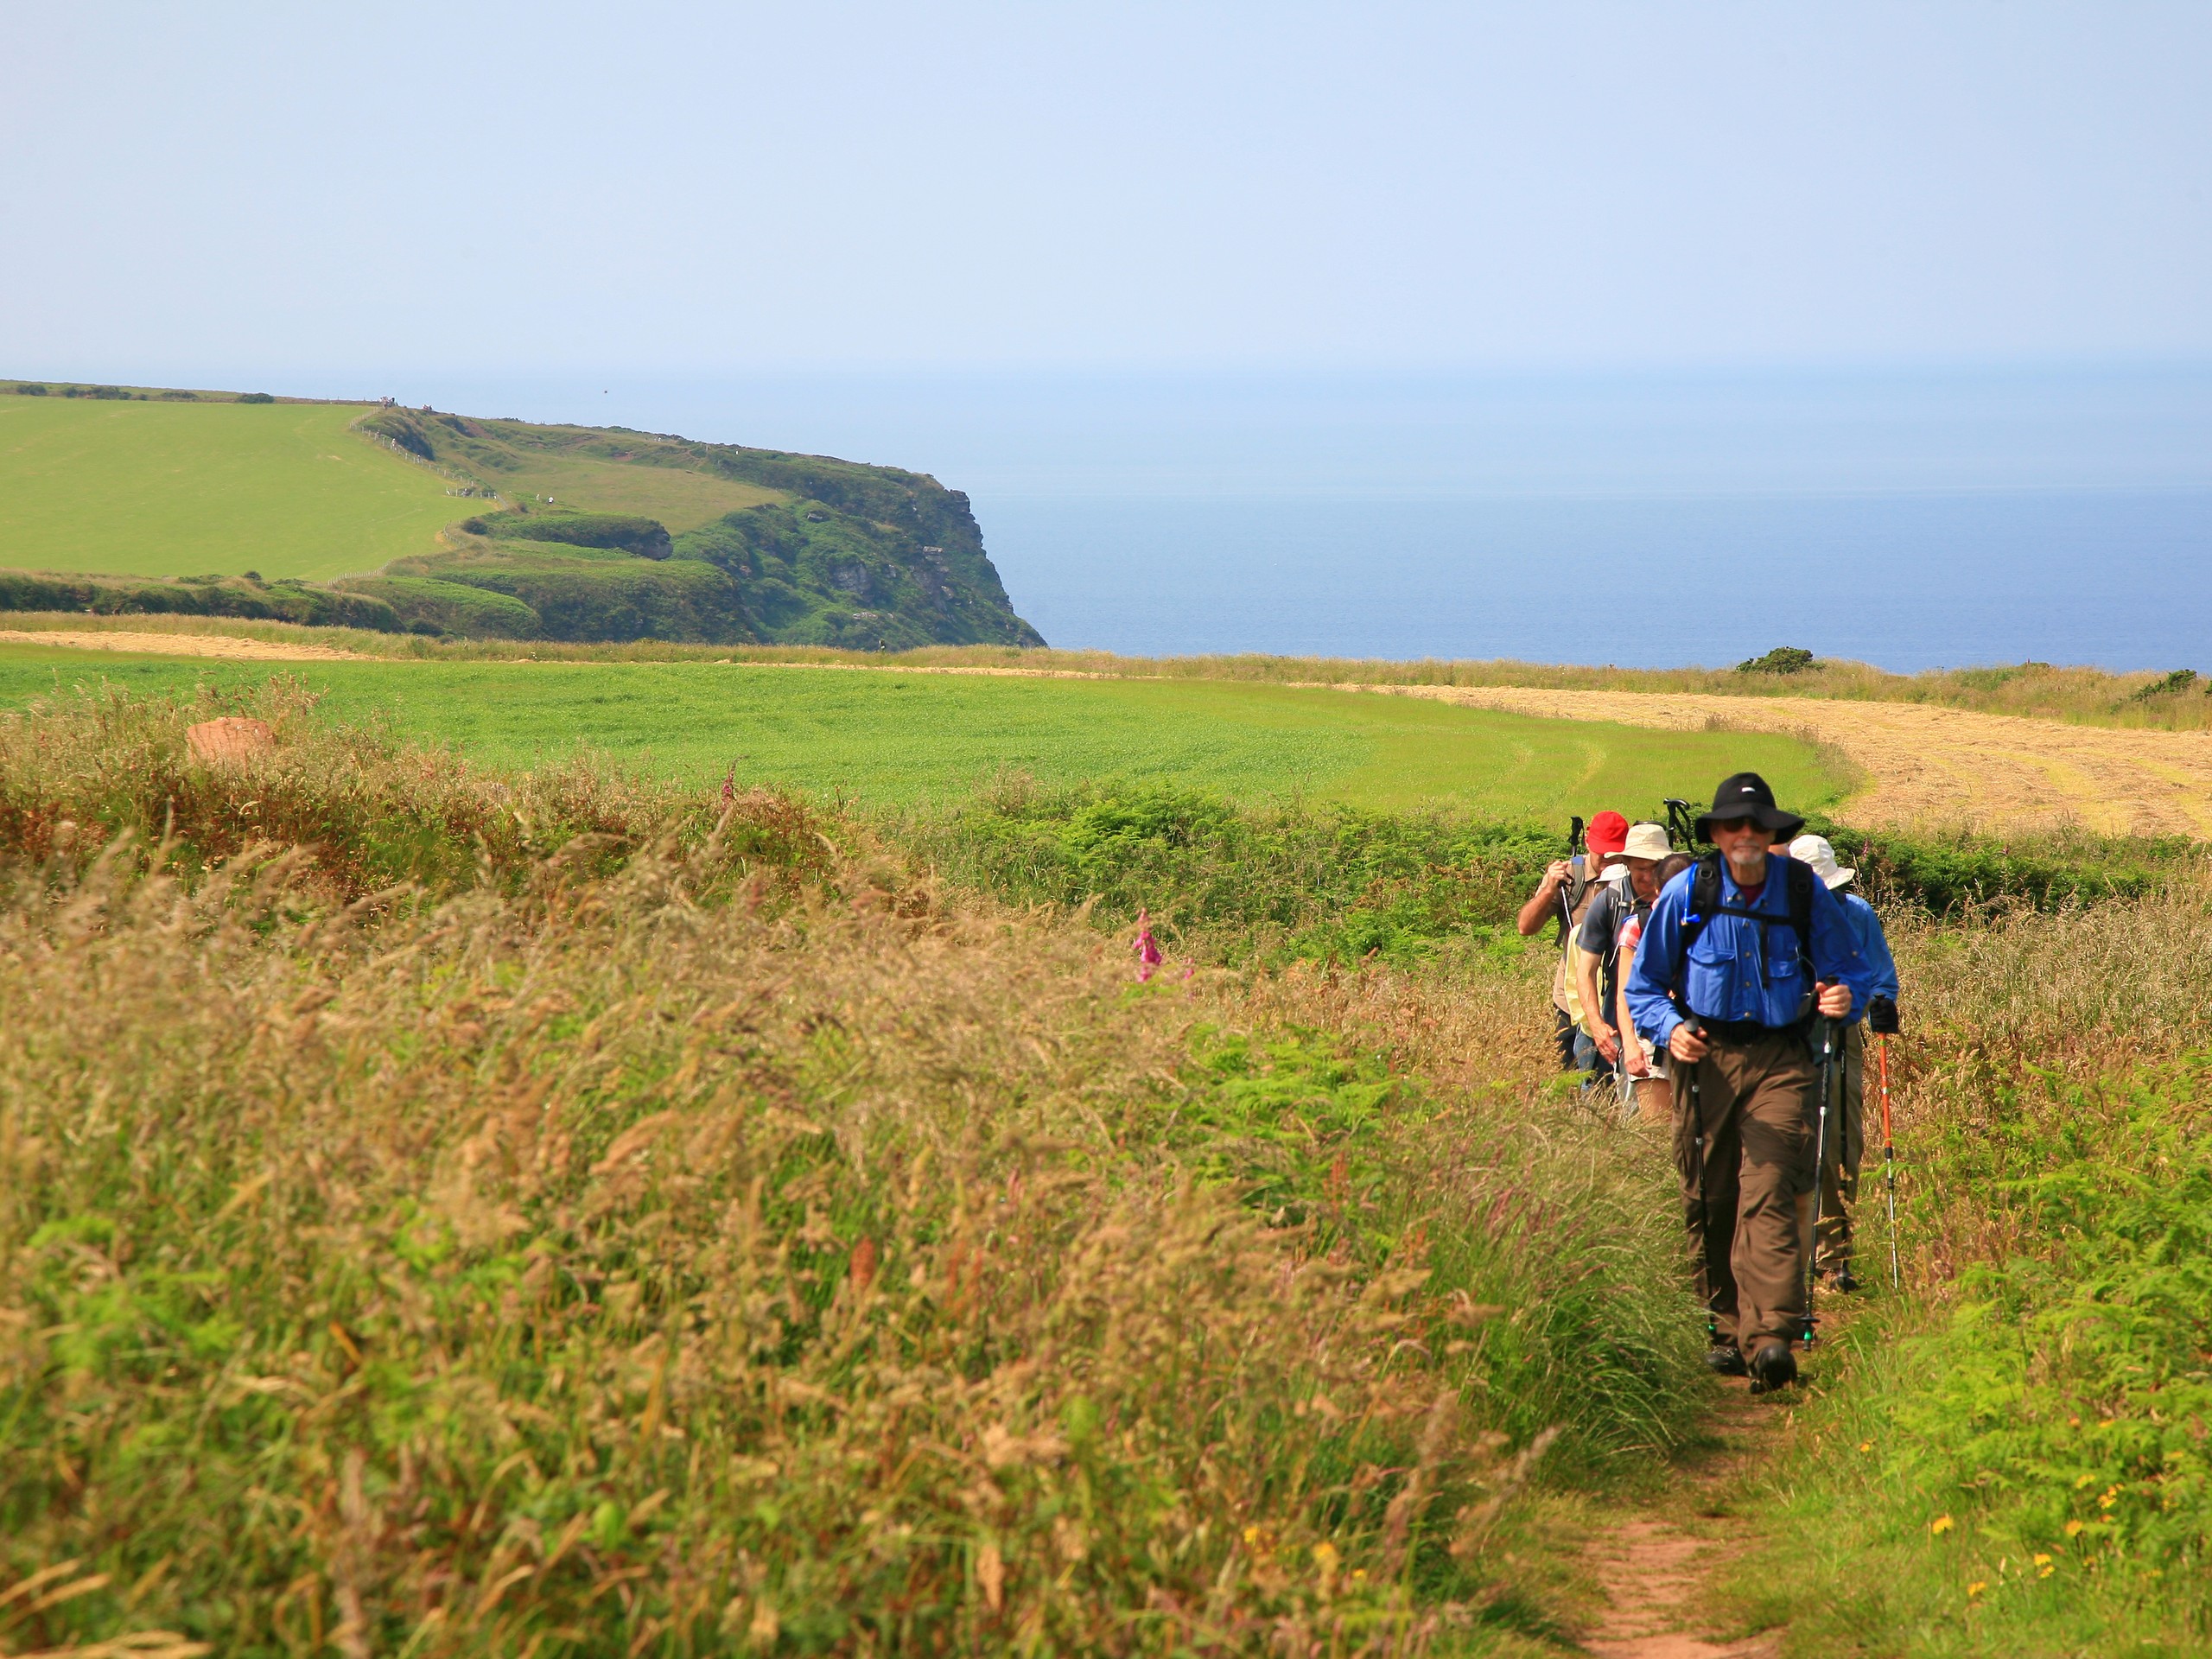 Group of walkers on a narrow path along the Northern England's coast (c)John Millen